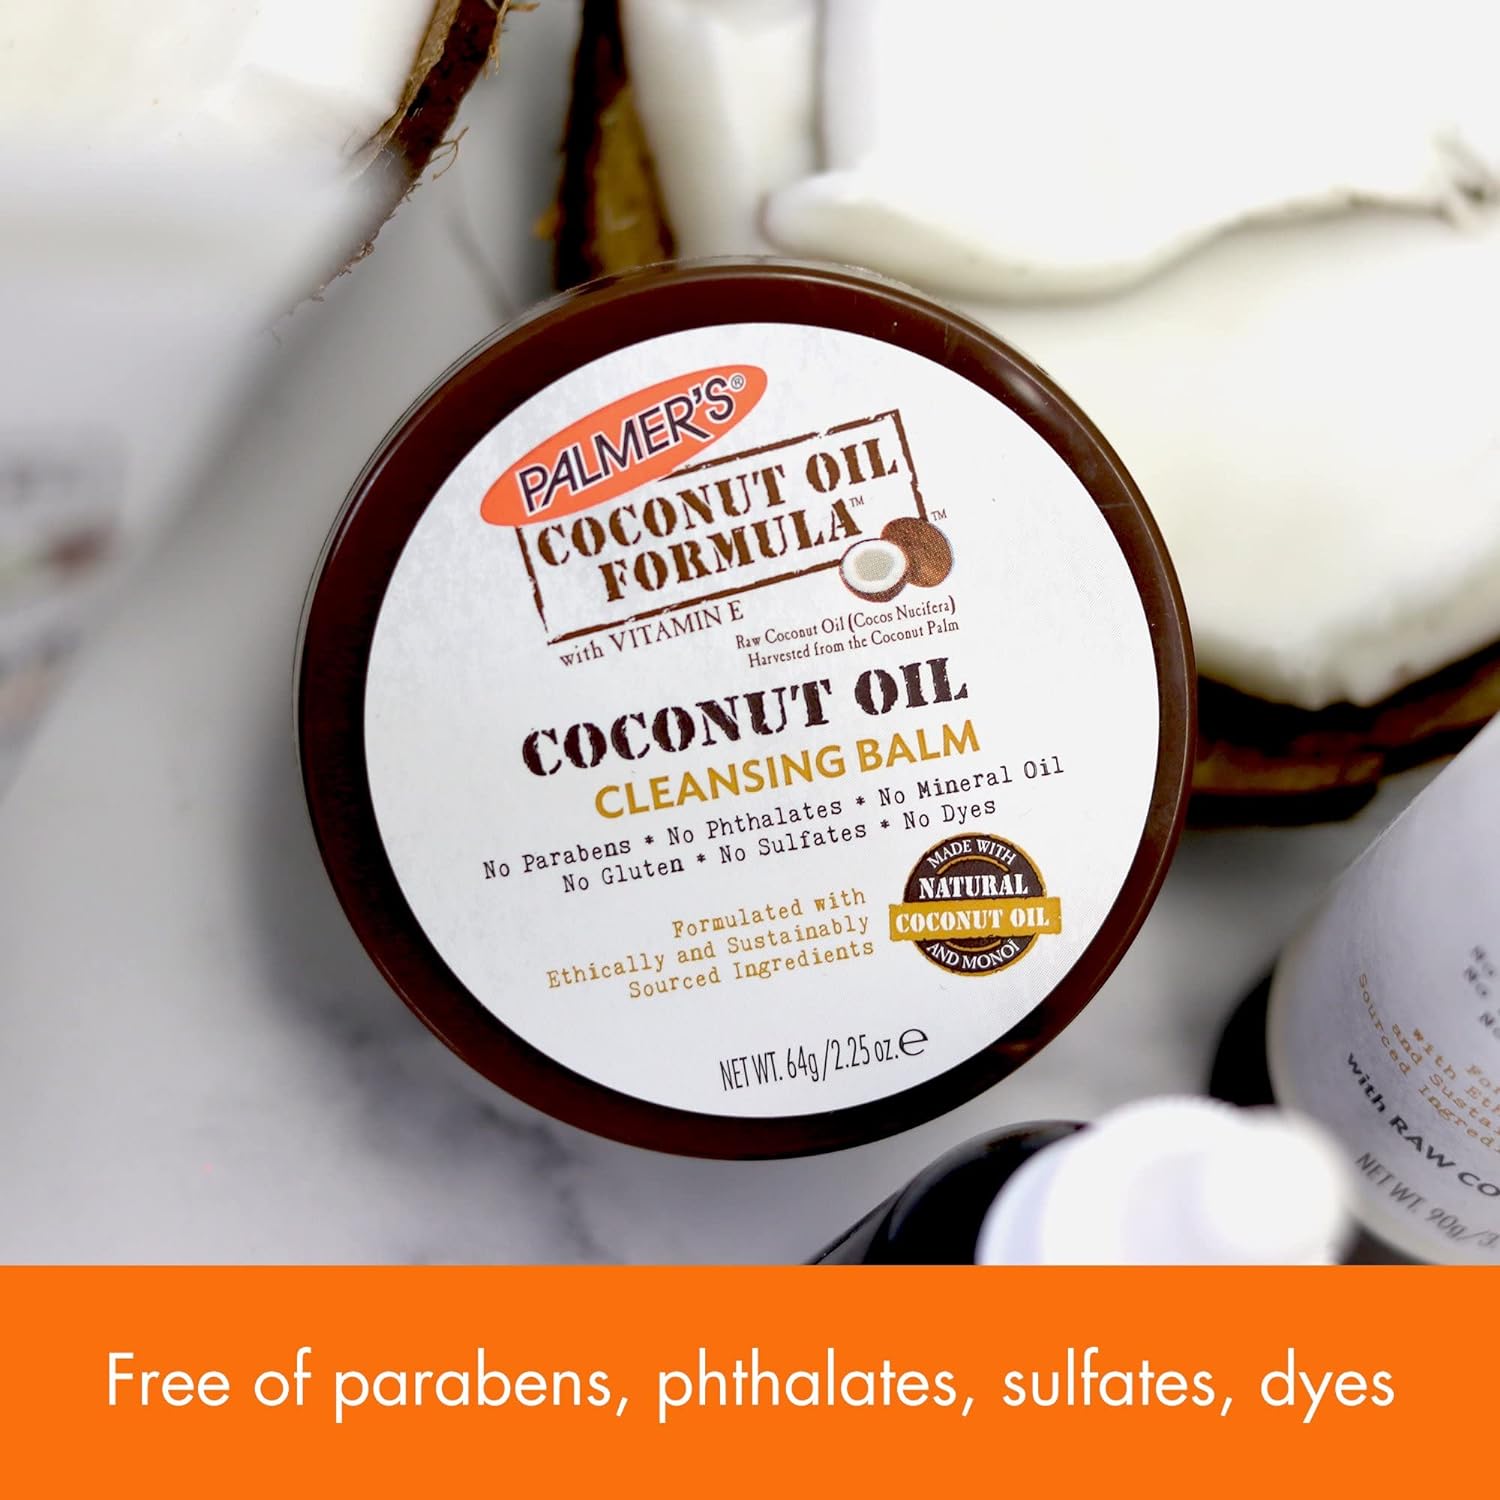 Palmer's Coconut Oil Formula, Coconut Monoi Facial Cleansing Balm and Makeup Remover, 2.25 Ounces : Beauty & Personal Care